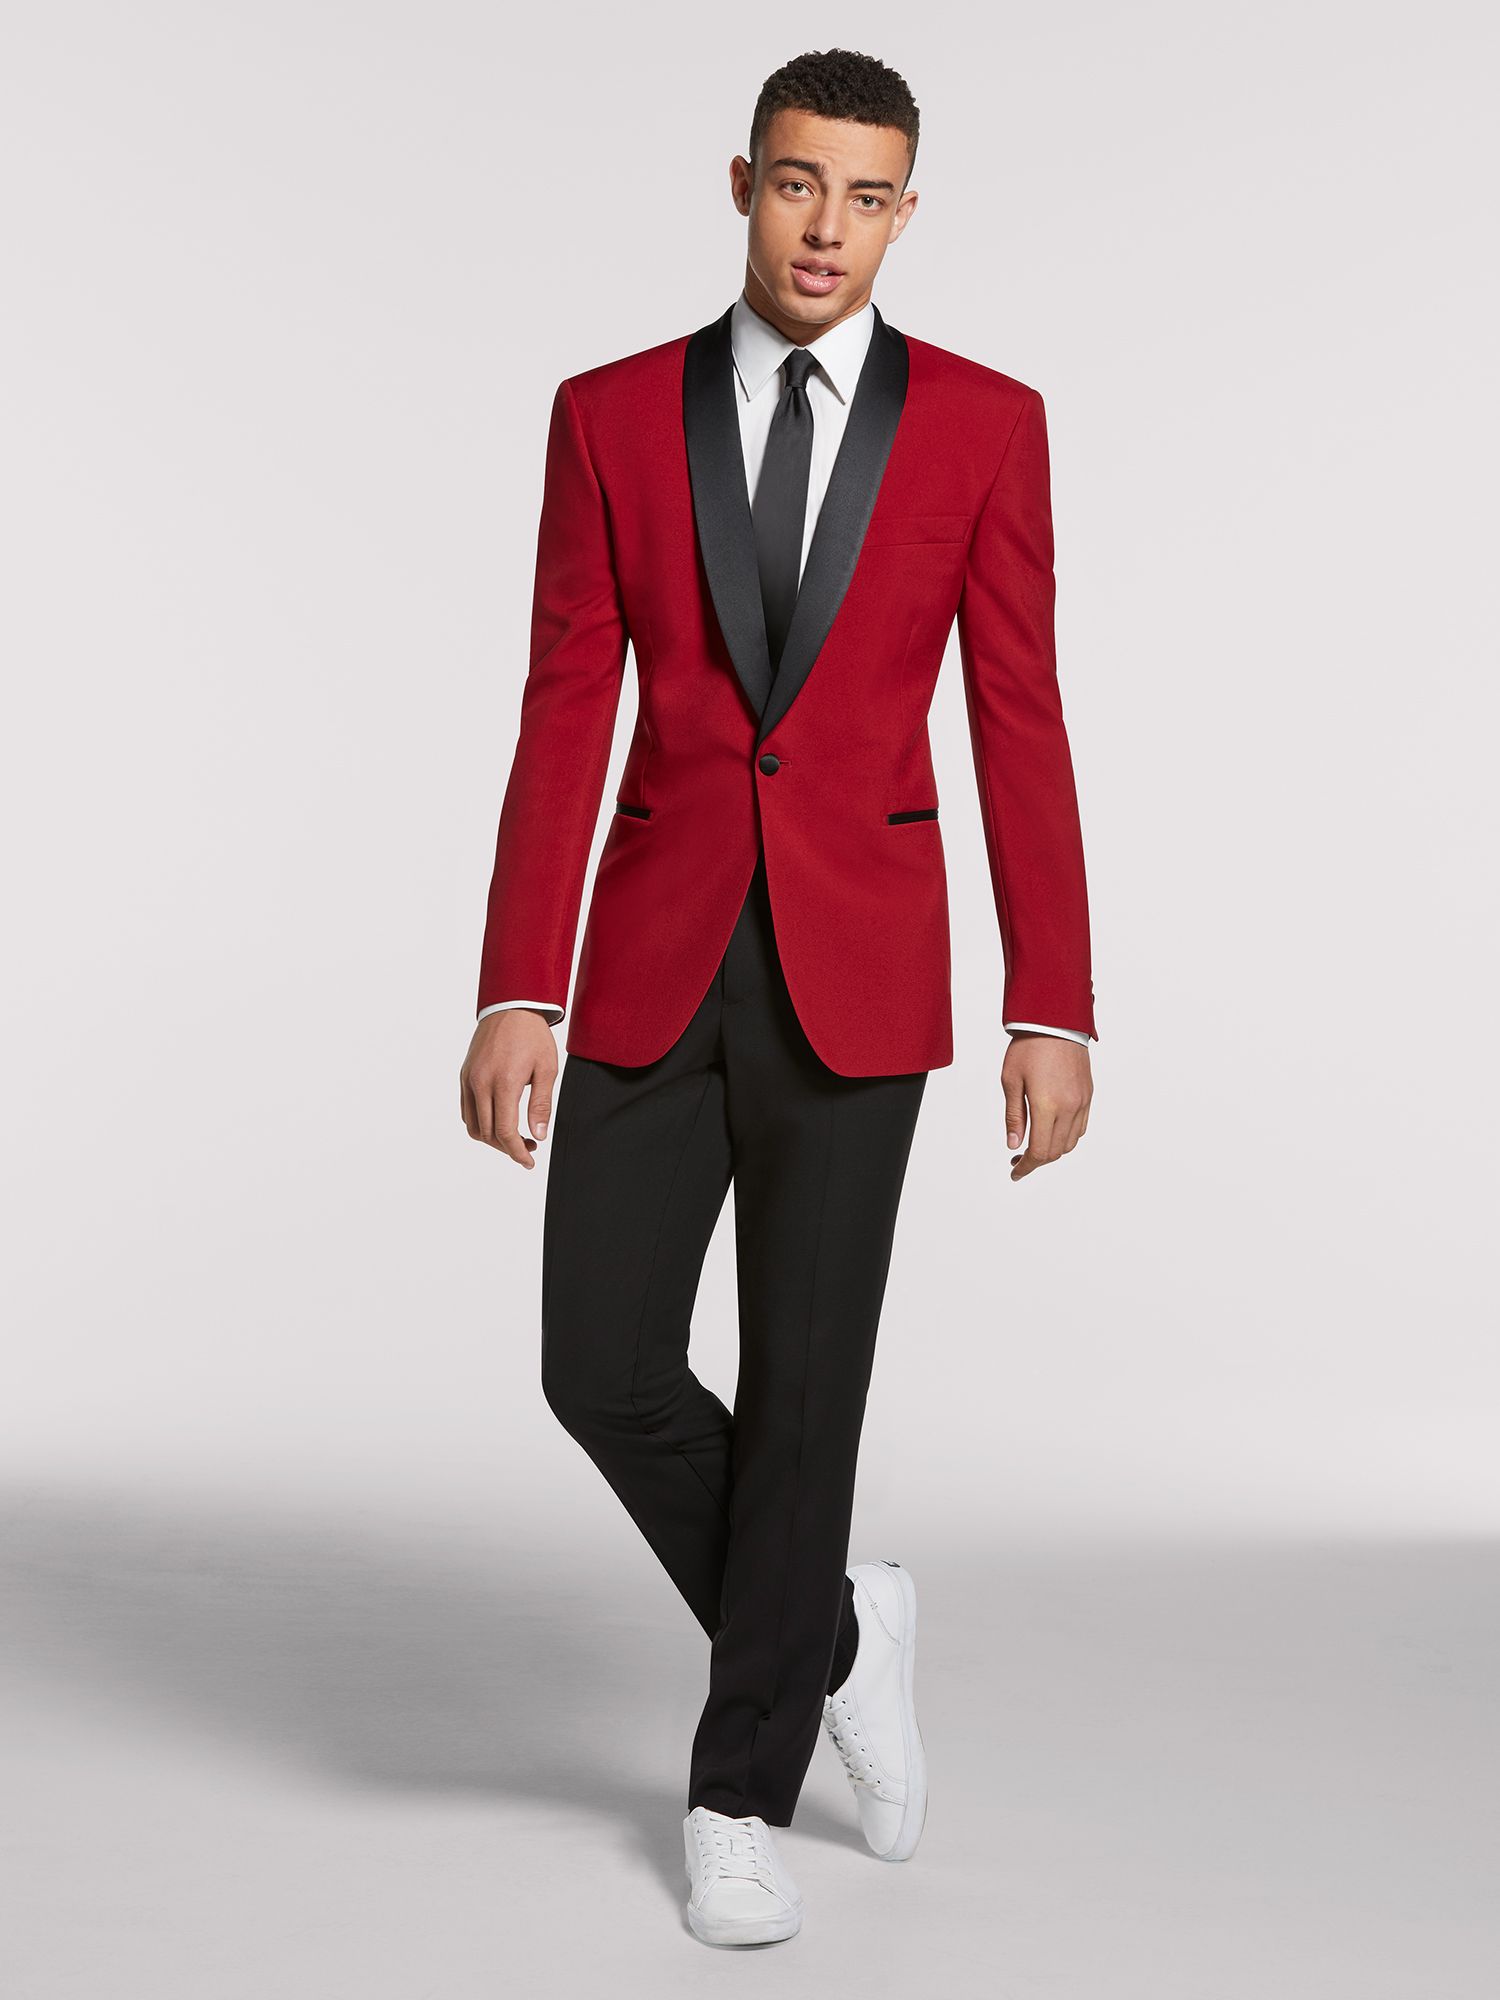 Red And Black Prom Suits - All You Need Infos